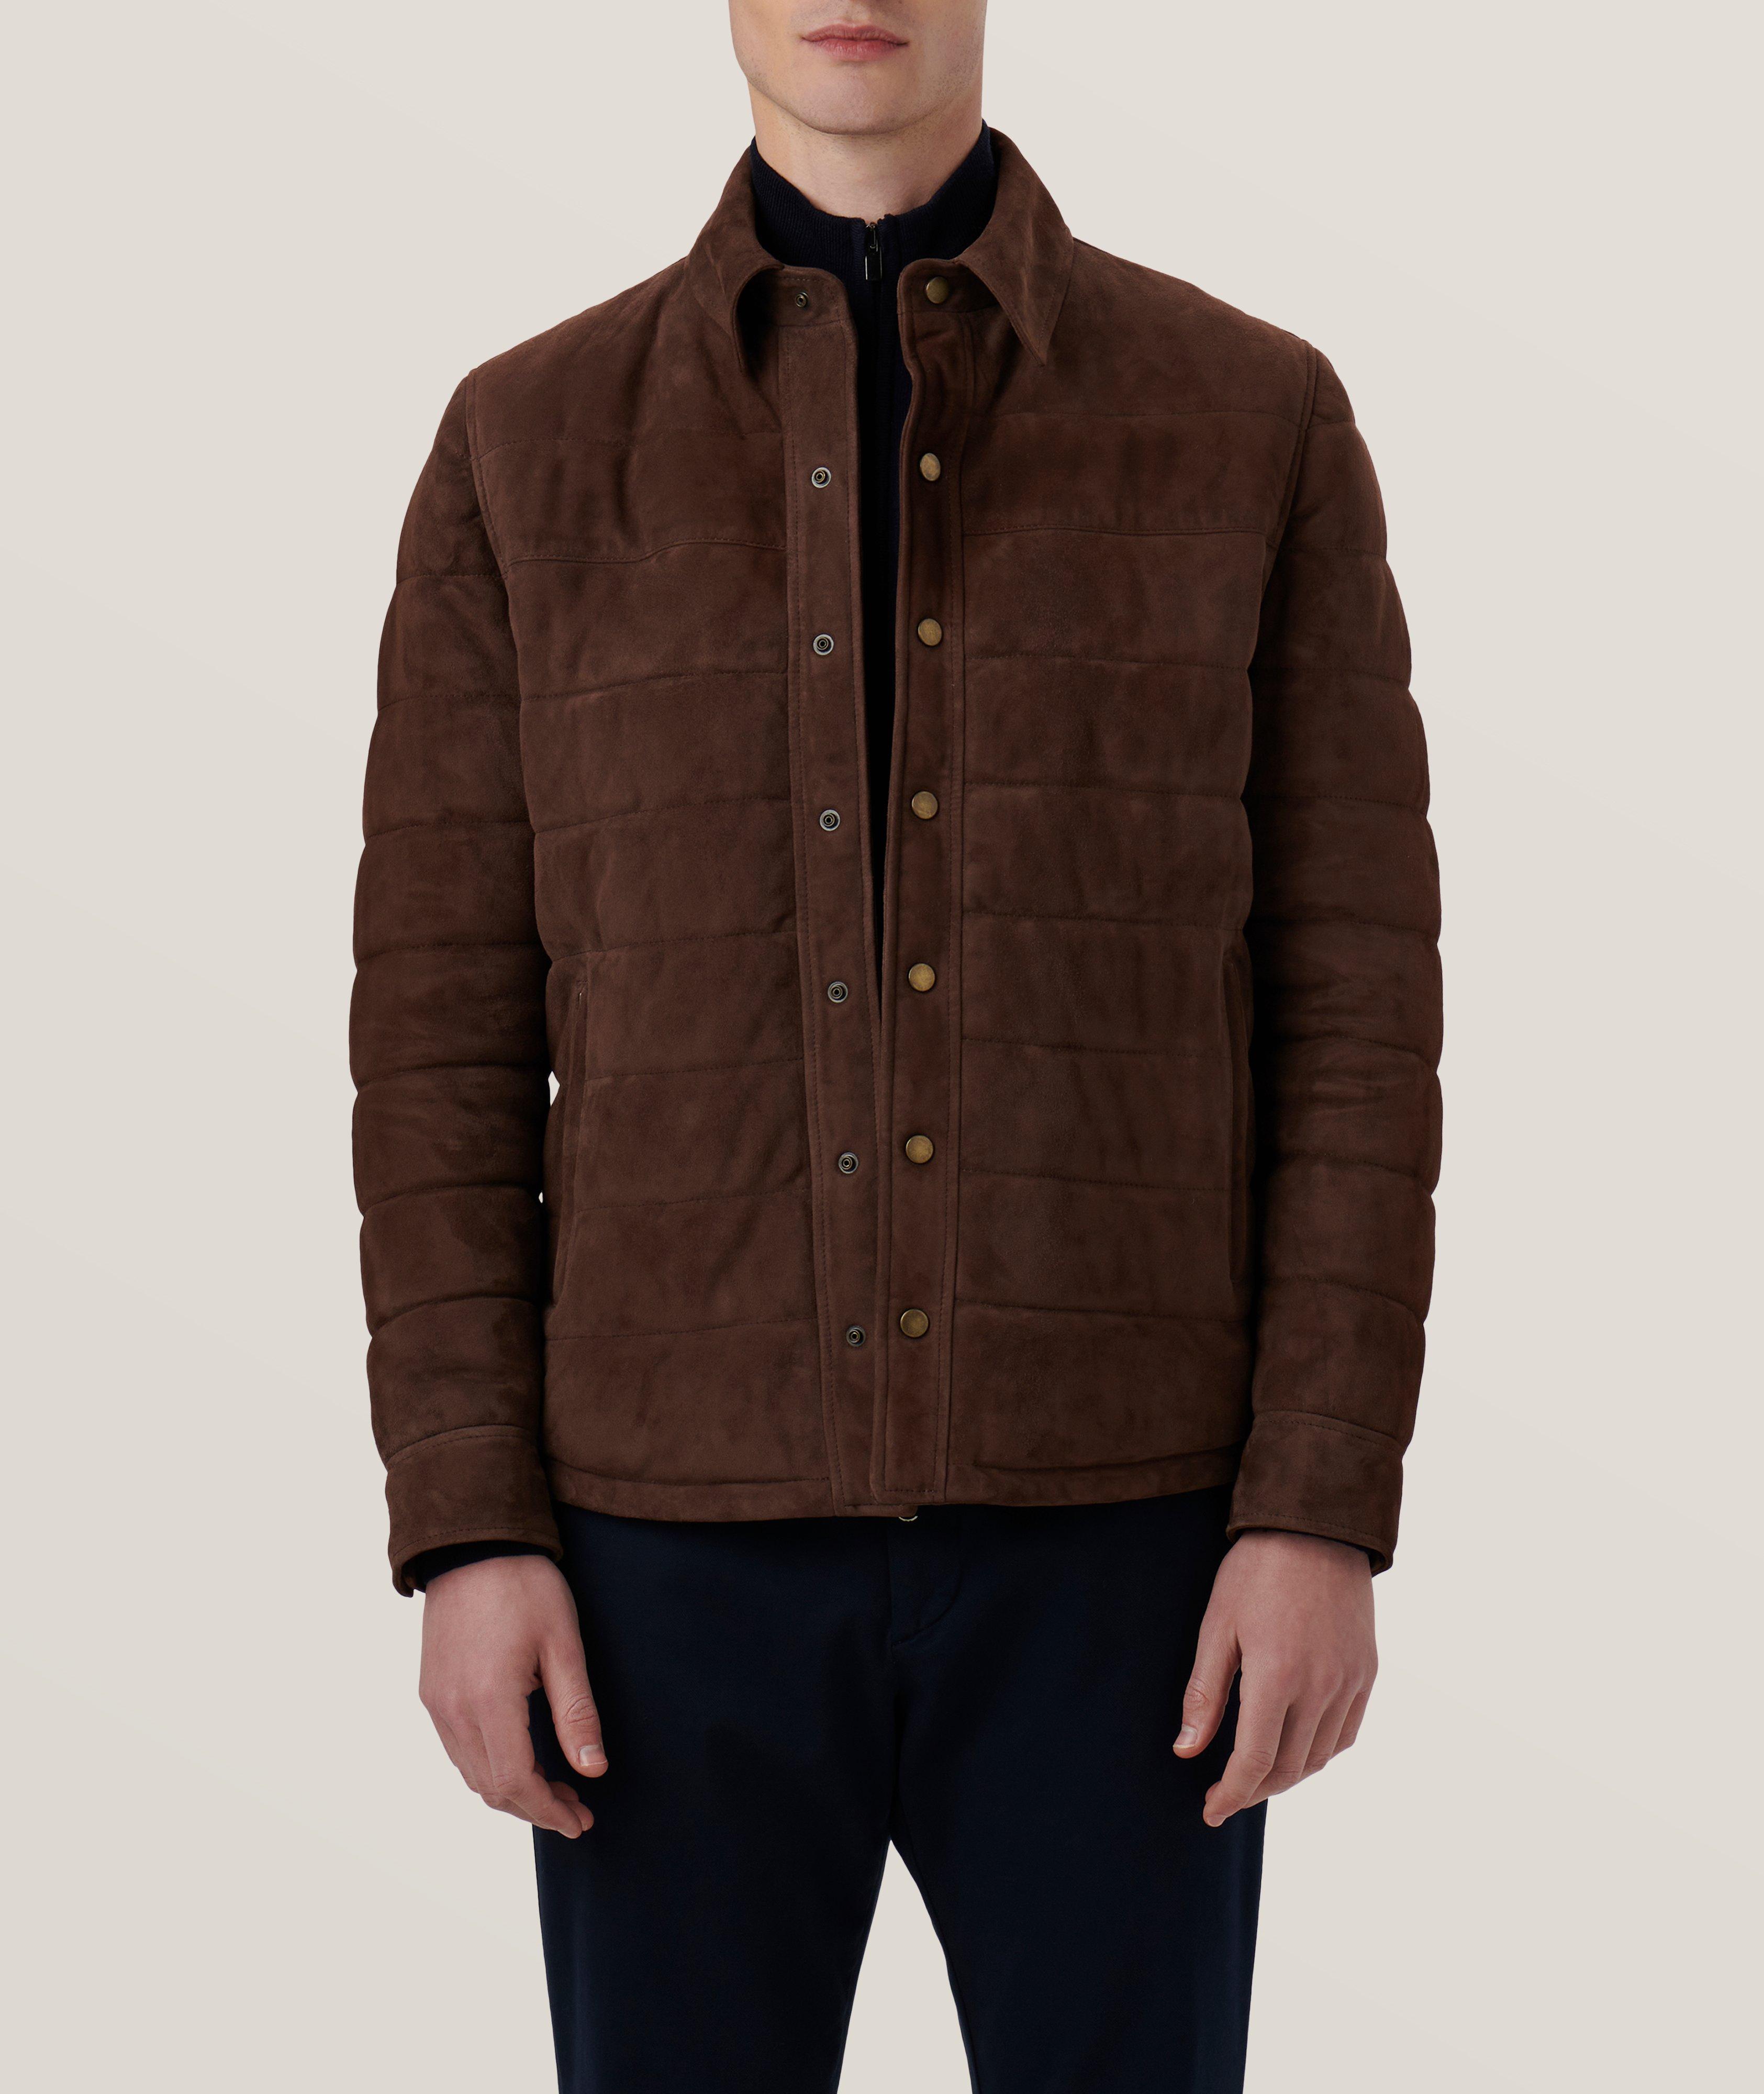 Quilted Suede Jacket image 2